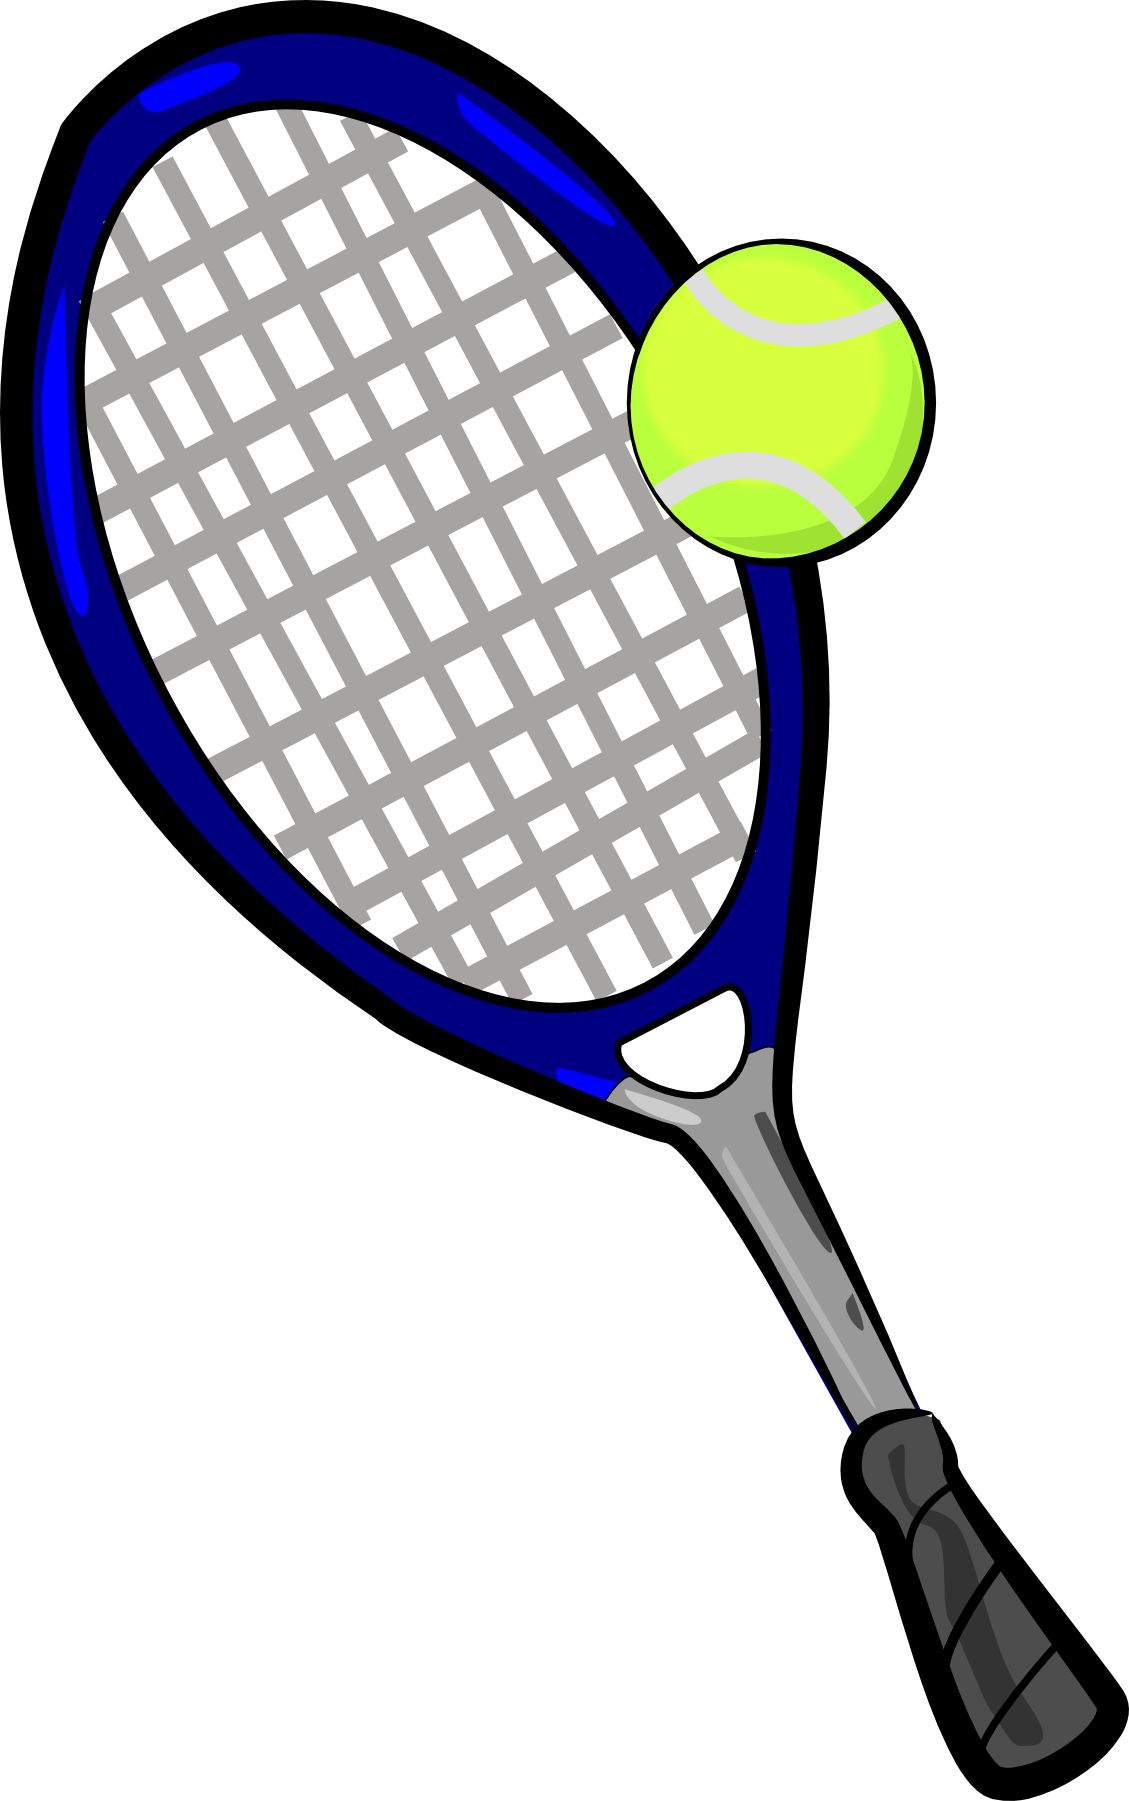 Related Pictures Tennis Racket Clip Art Car Pictures